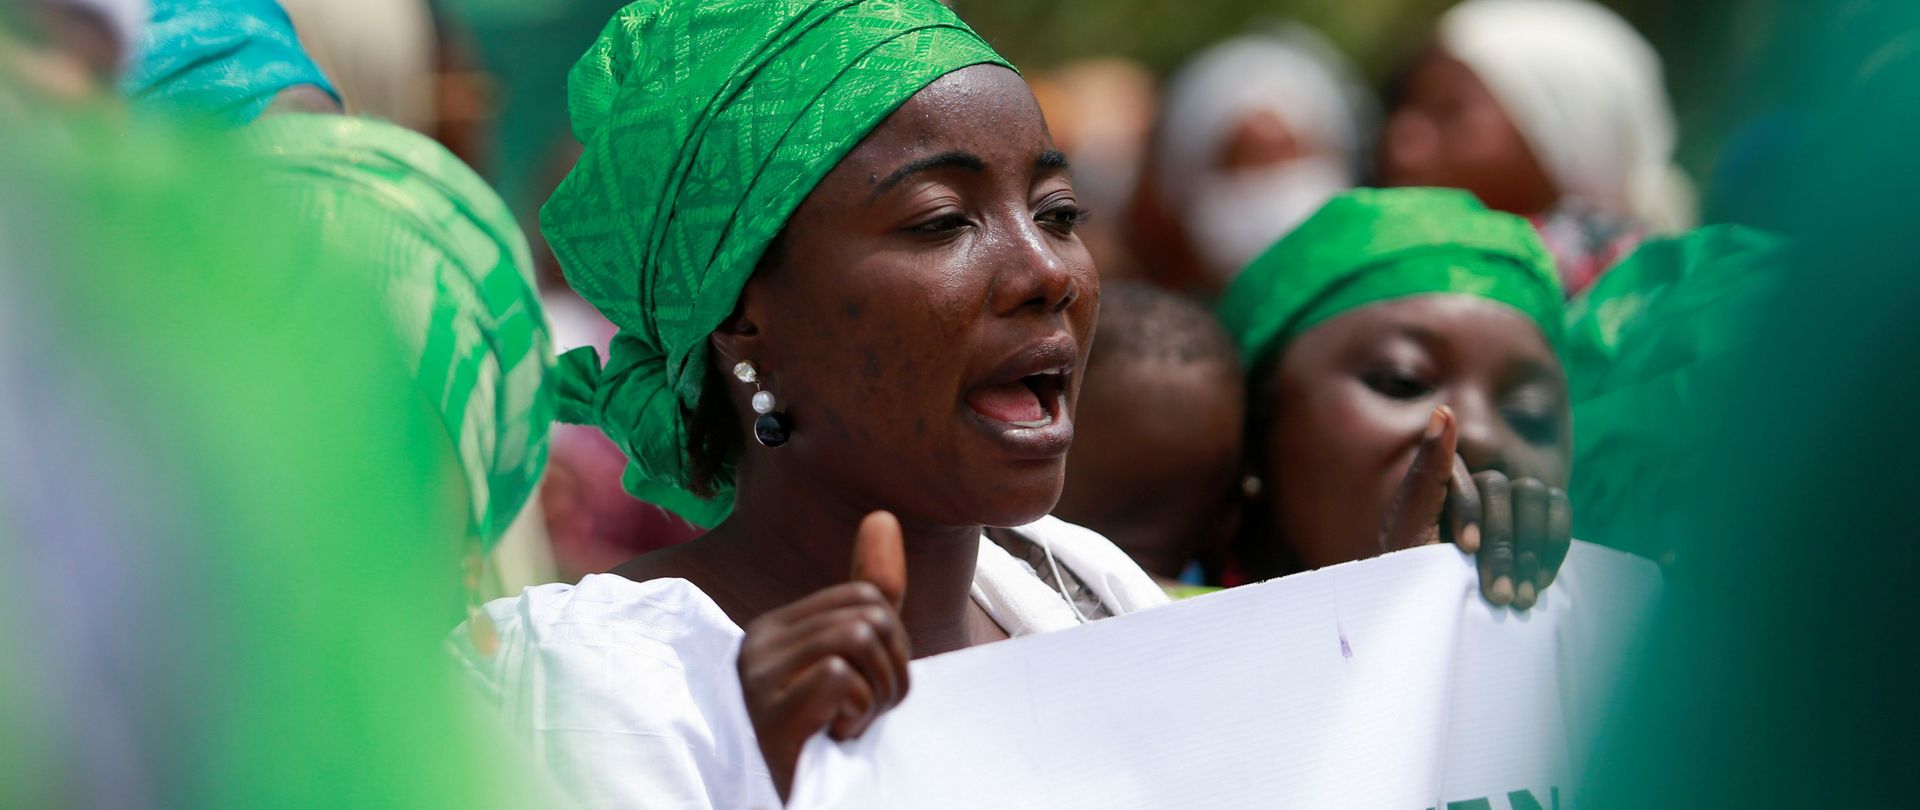 Abuja, March 8, 2022: A woman marches to protest against legislative bias against women on International Women